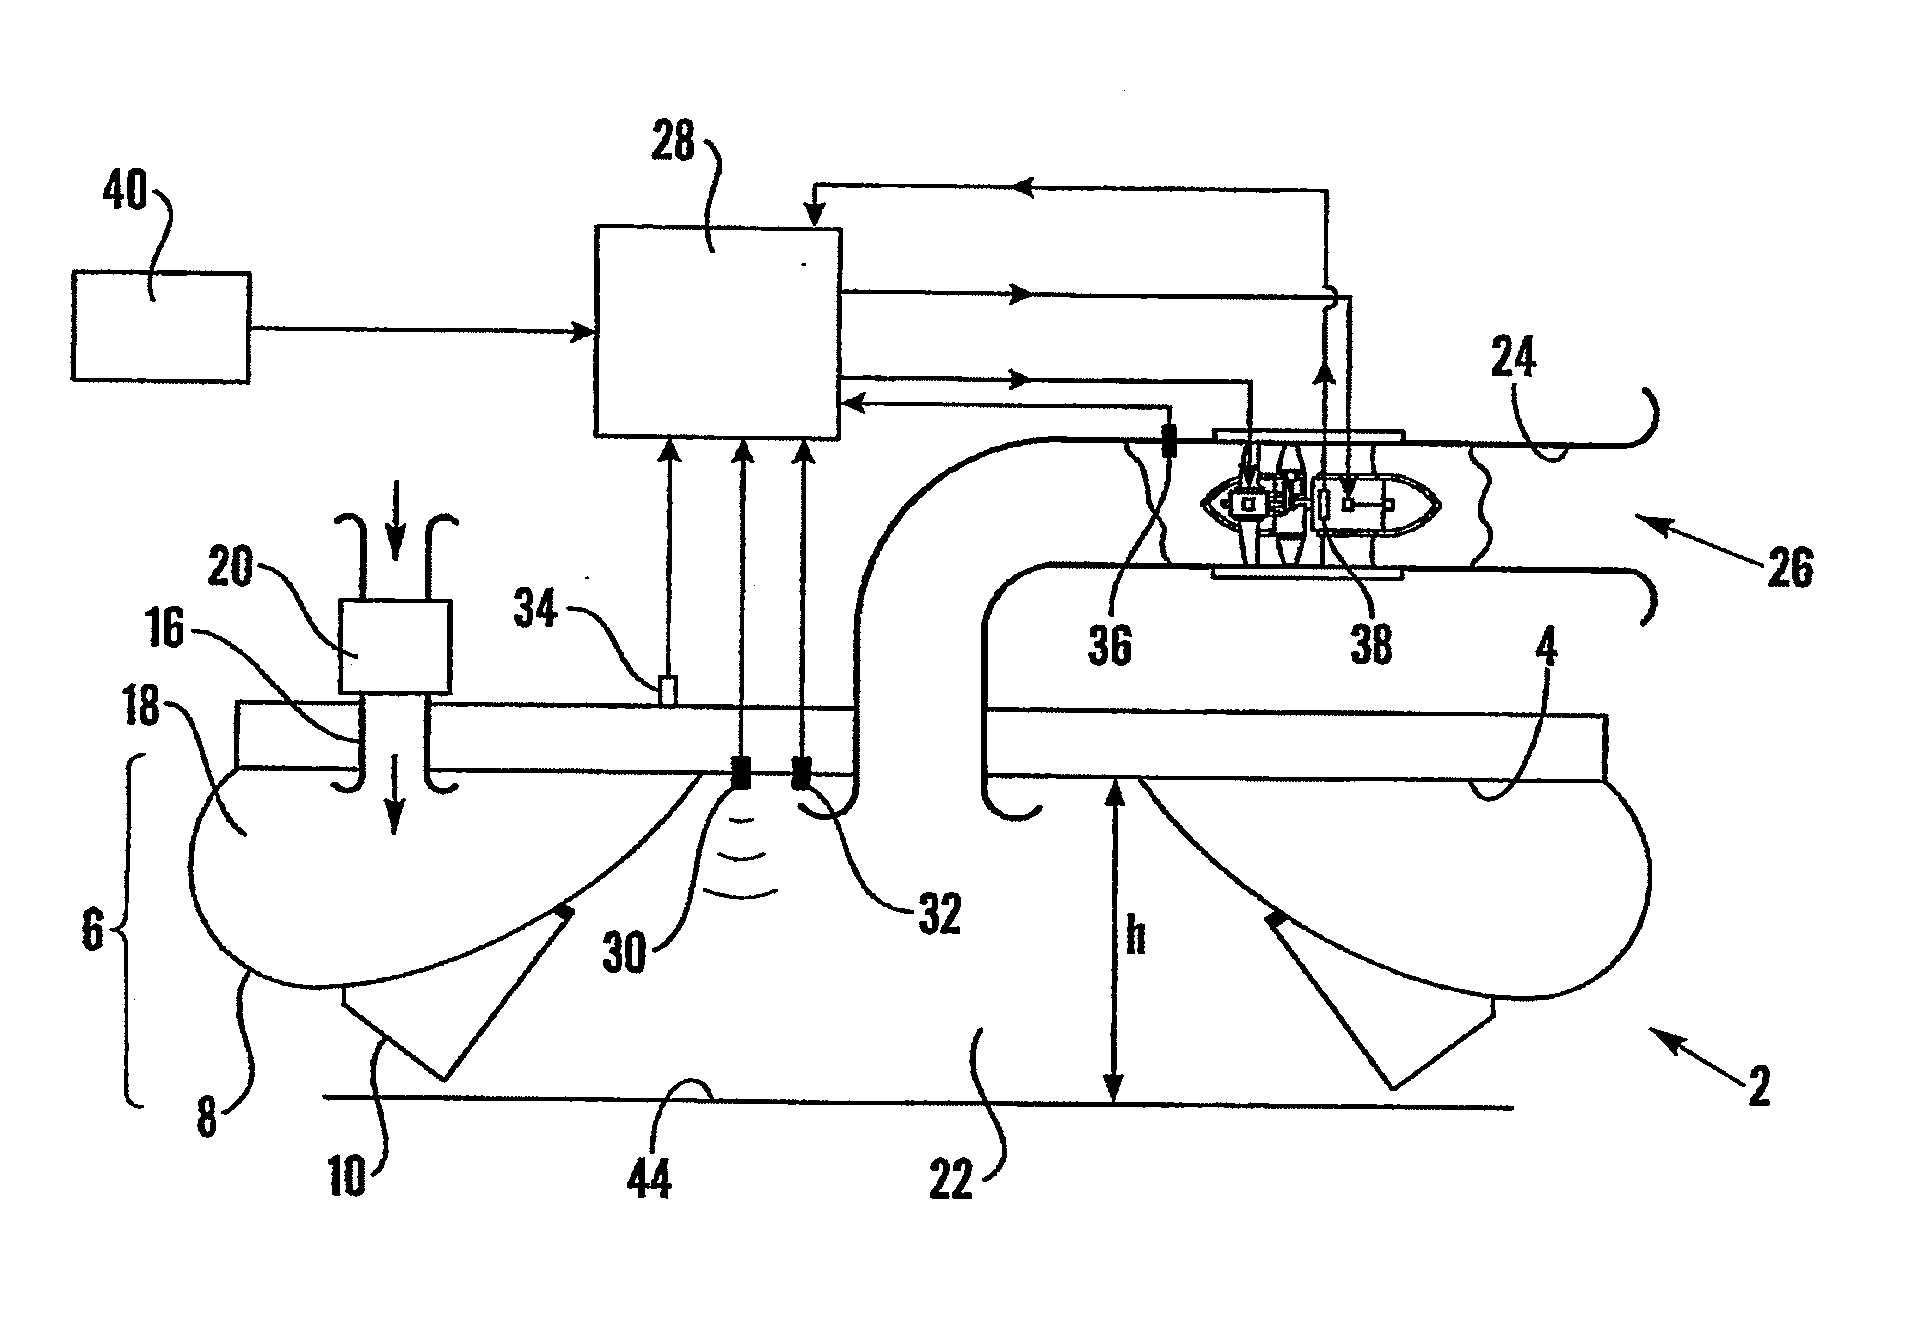 Air cushion landing system and method of operation